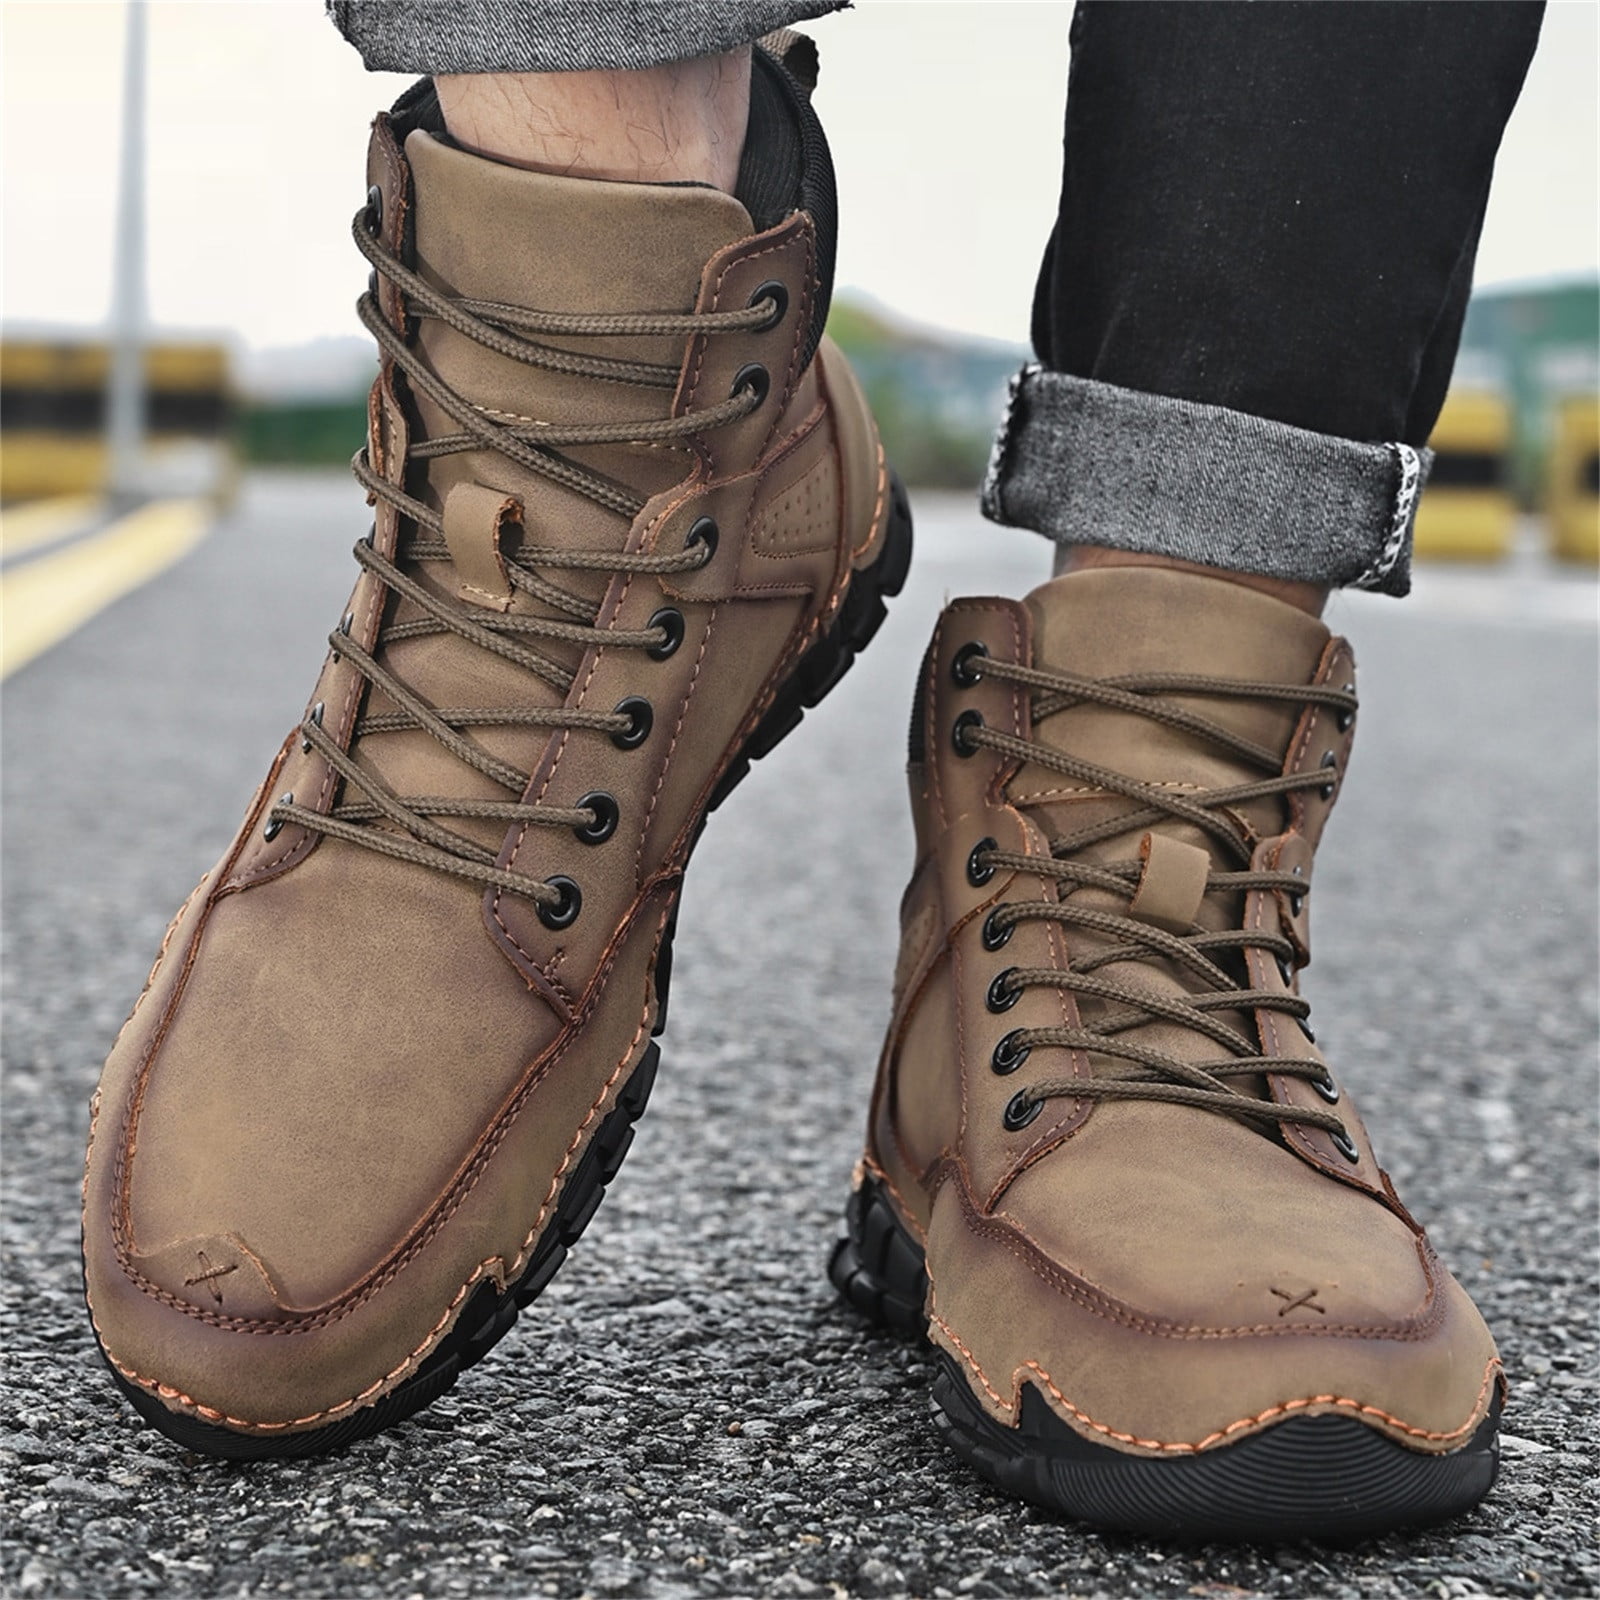 NRUDPQV fashion men's shoes breathable high heels retro lace-up thermal  leather short boots 